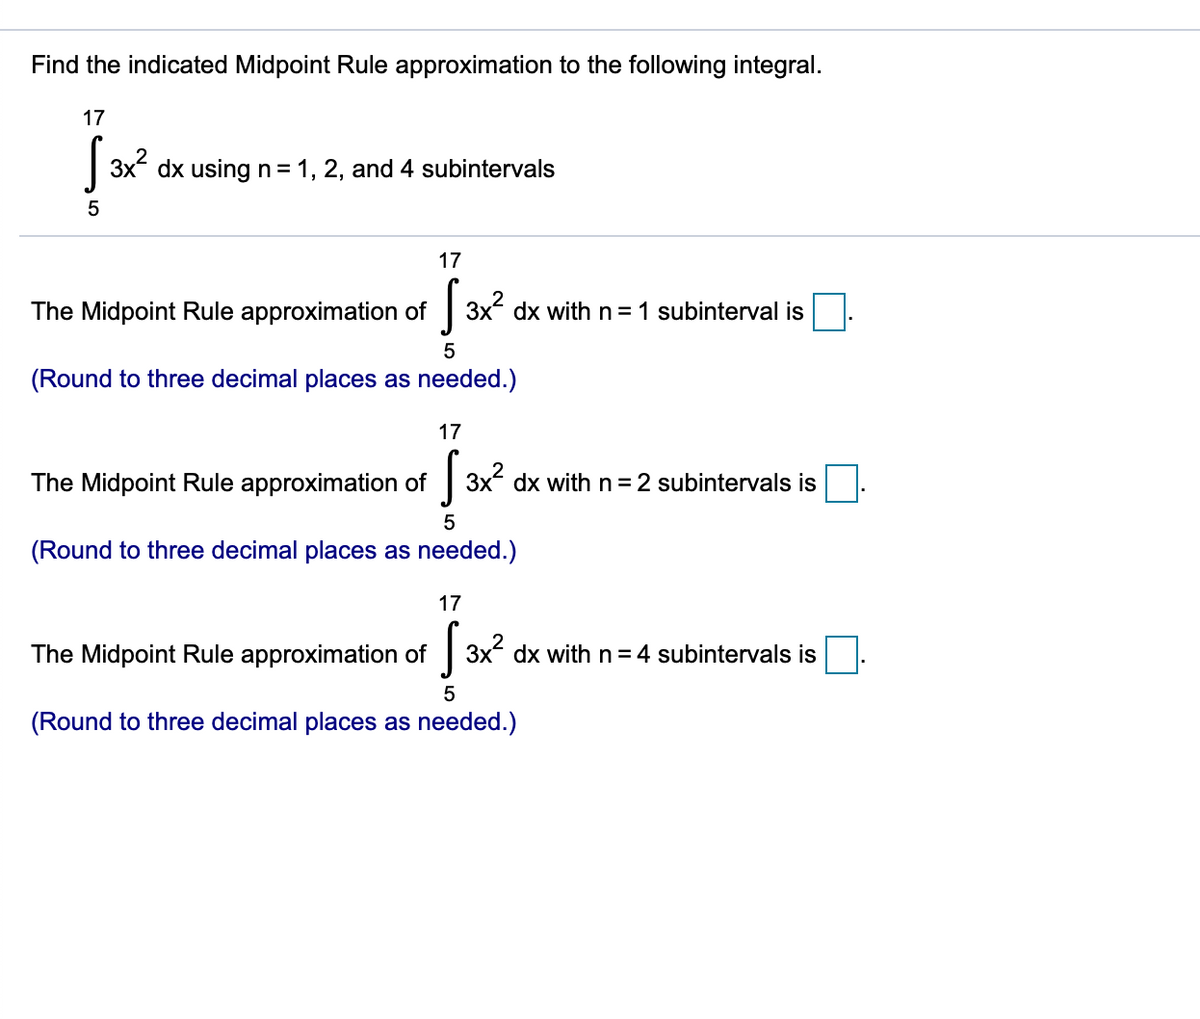 Find the indicated Midpoint Rule approximation to the following integral.
17
| 3x dx usingn=1, 2, and 4 subintervals
17
The Midpoint Rule approximation of
3x dx with n = 1 subinterval is
(Round to three decimal places as needed.)
17
The Midpoint Rule approximation of 3x dx with n = 2 subintervals is
5
(Round to three decimal places as needed.)
17
The Midpoint Rule approximation of 3x dx withn=4 subintervals is
(Round to three decimal places as needed.)
